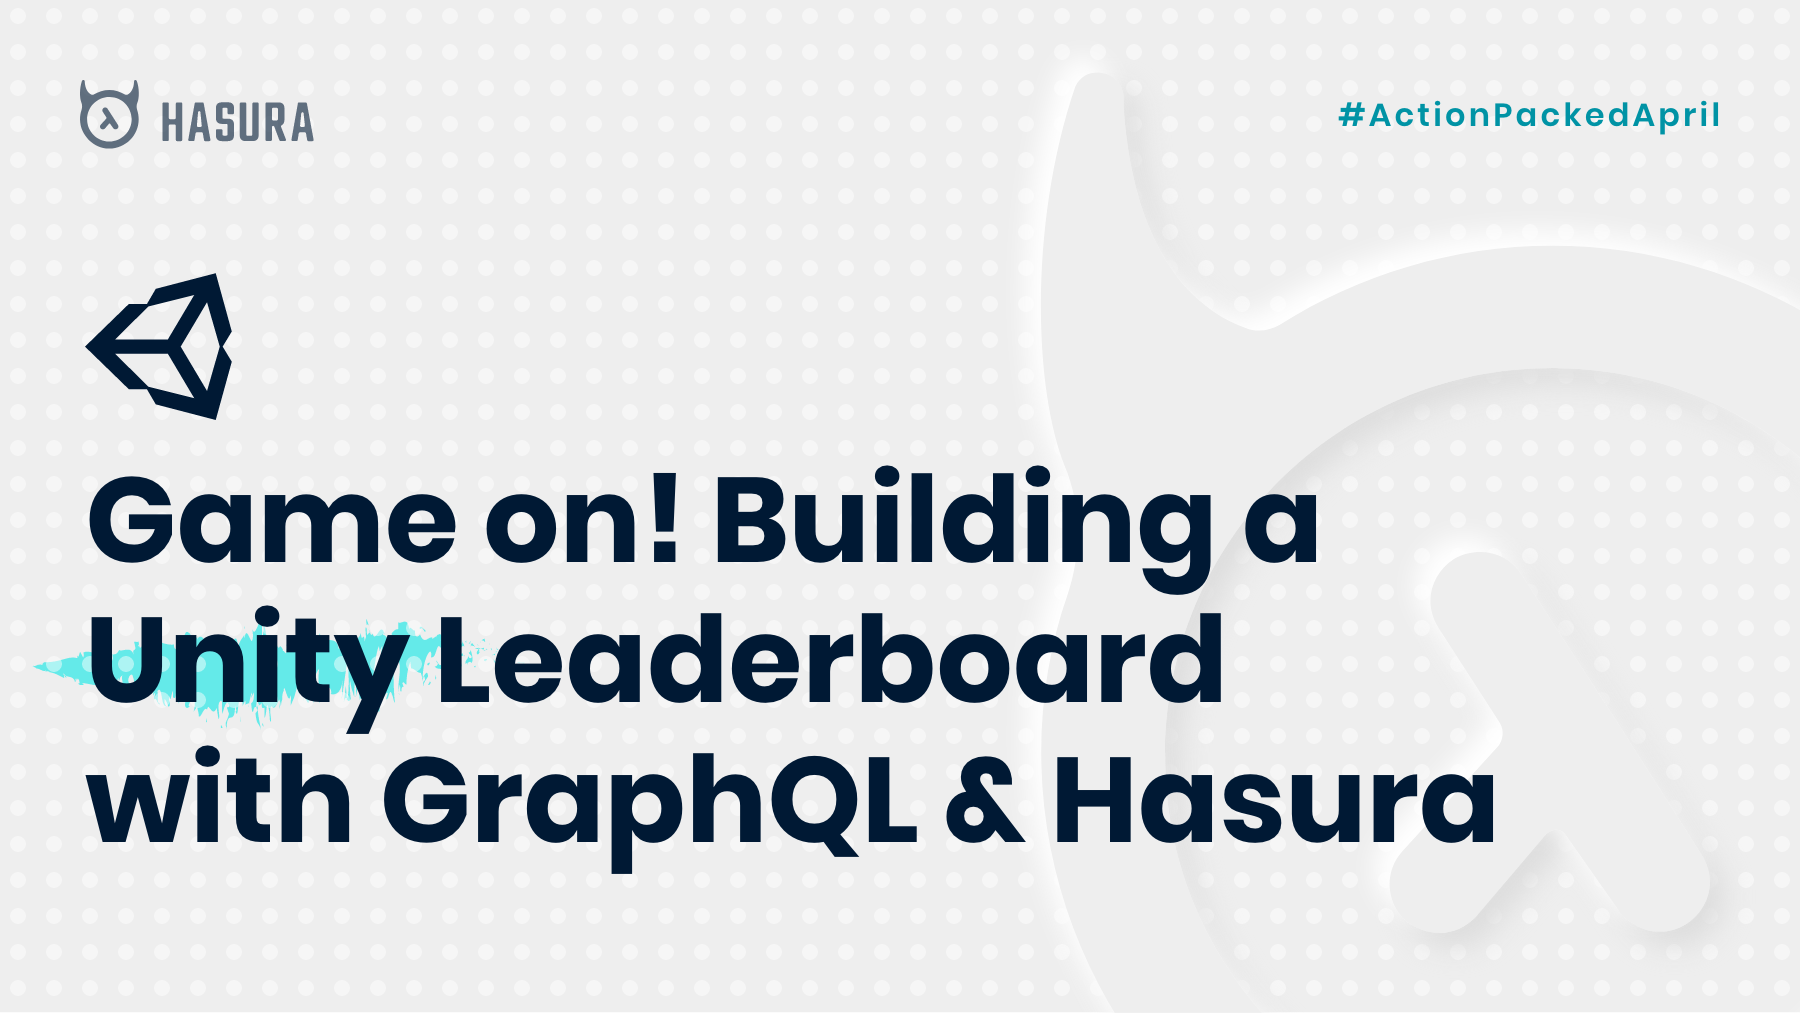 Game on! Building a Unity Leaderboard with GraphQL & Hasura